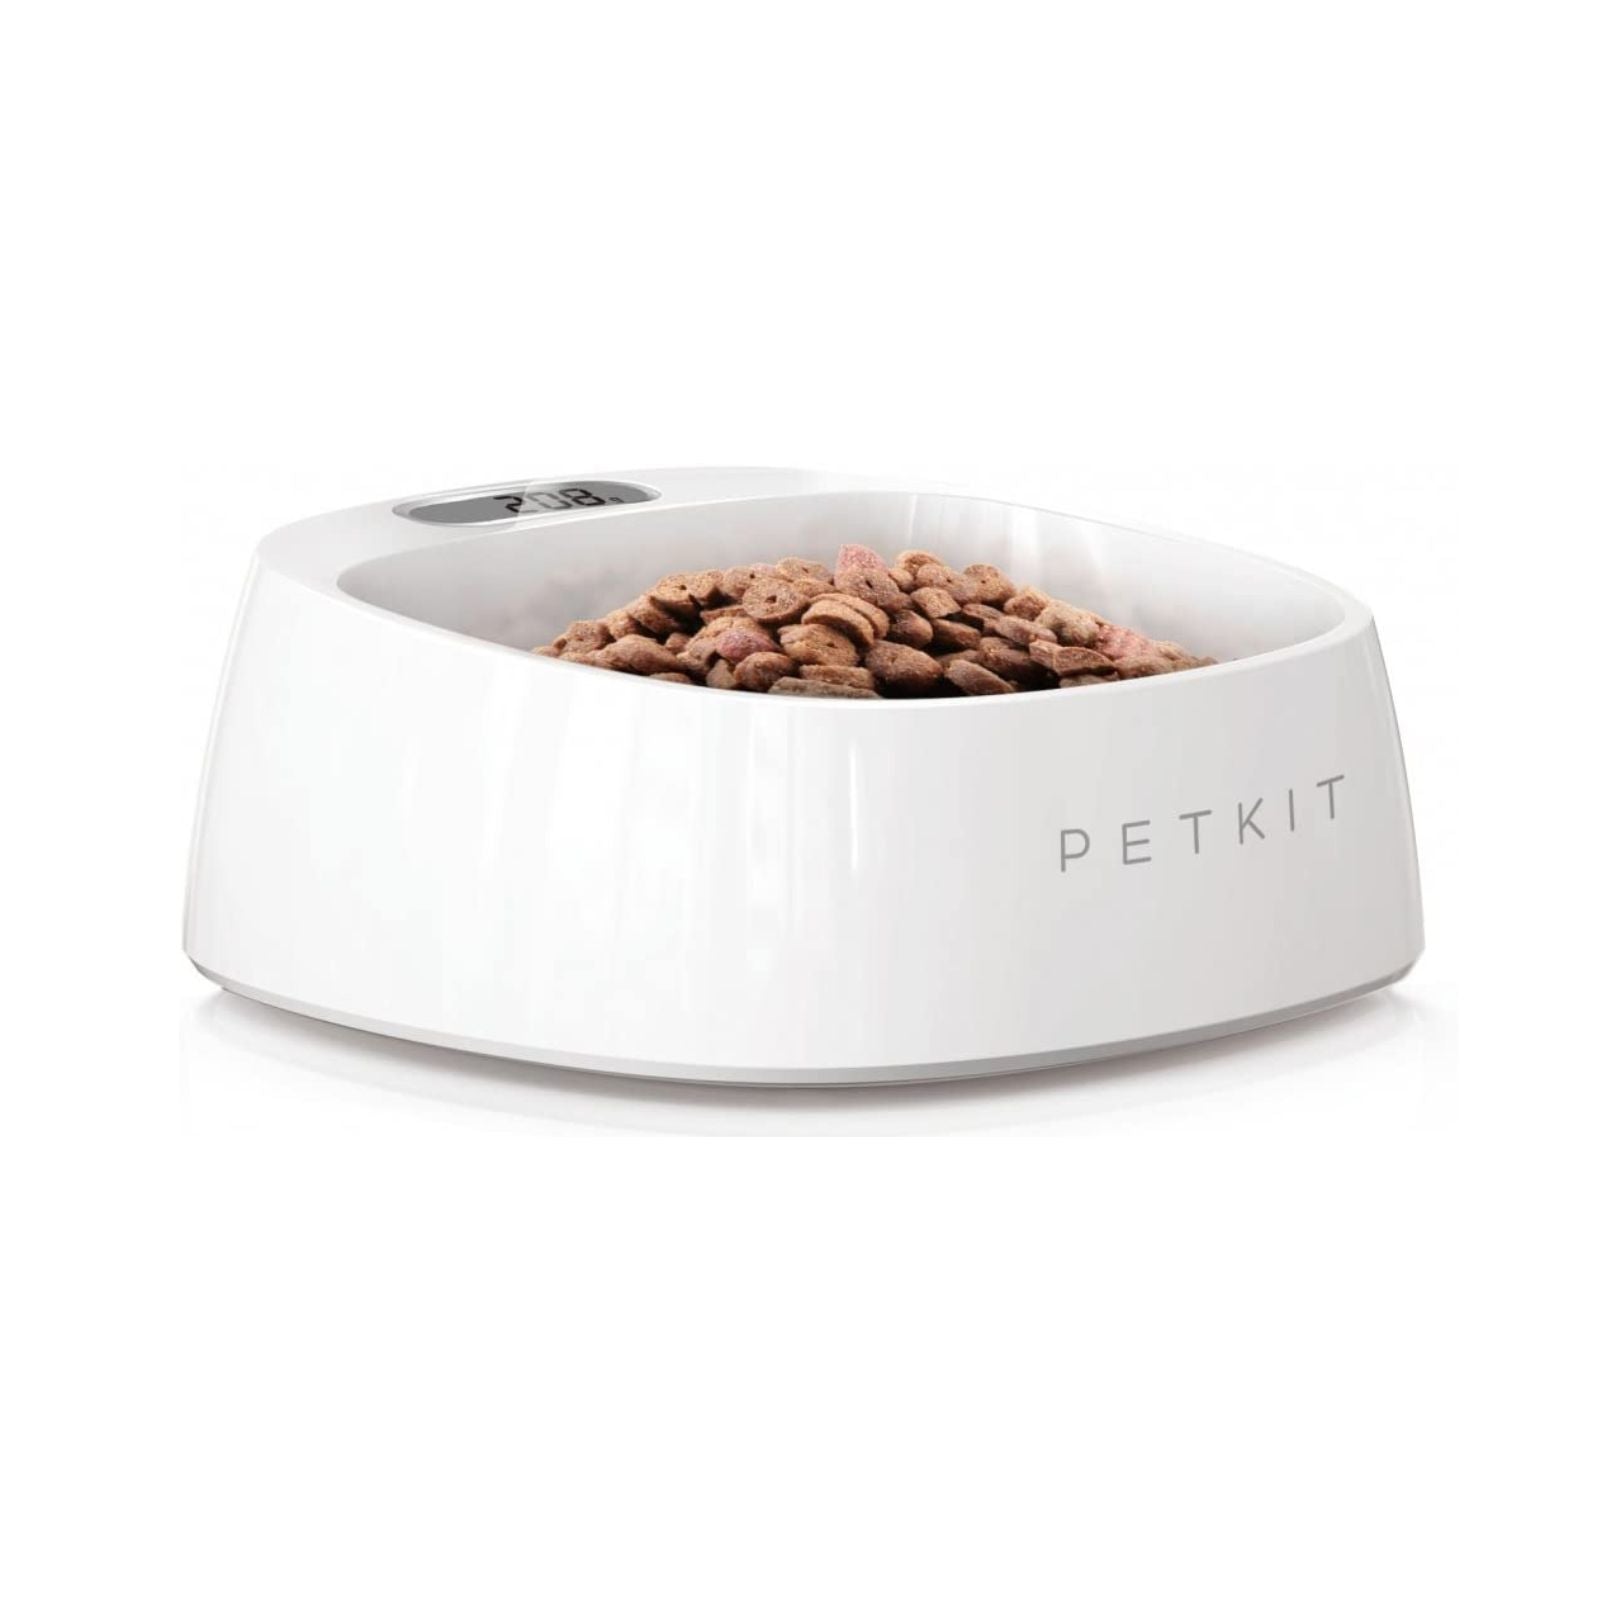 Petkit Fresh Smart Bowl with built-in digital scale that accurately measures the weight of your pet's food.